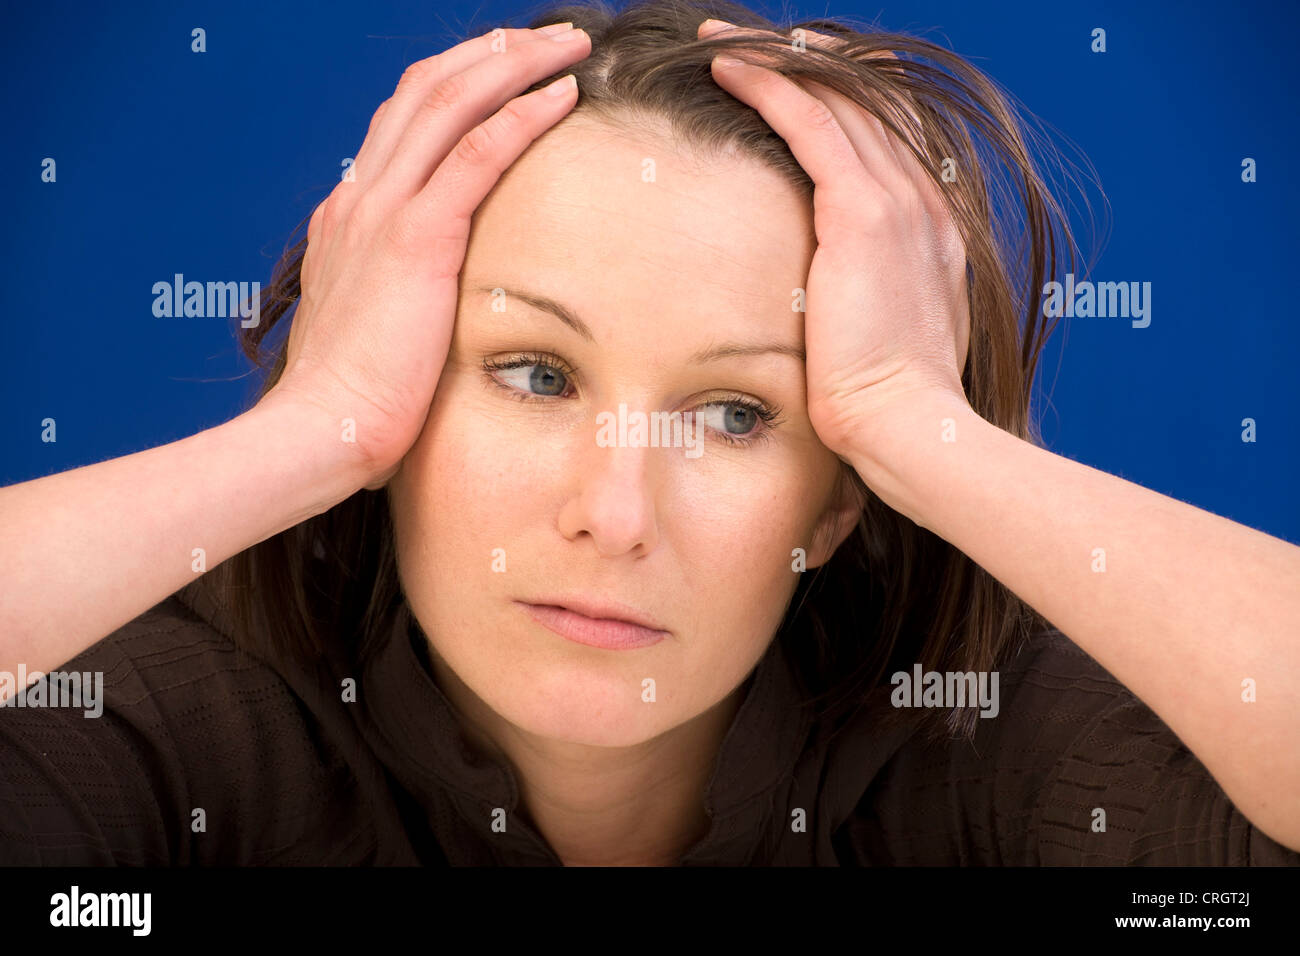 frustrated, young woman Stock Photo